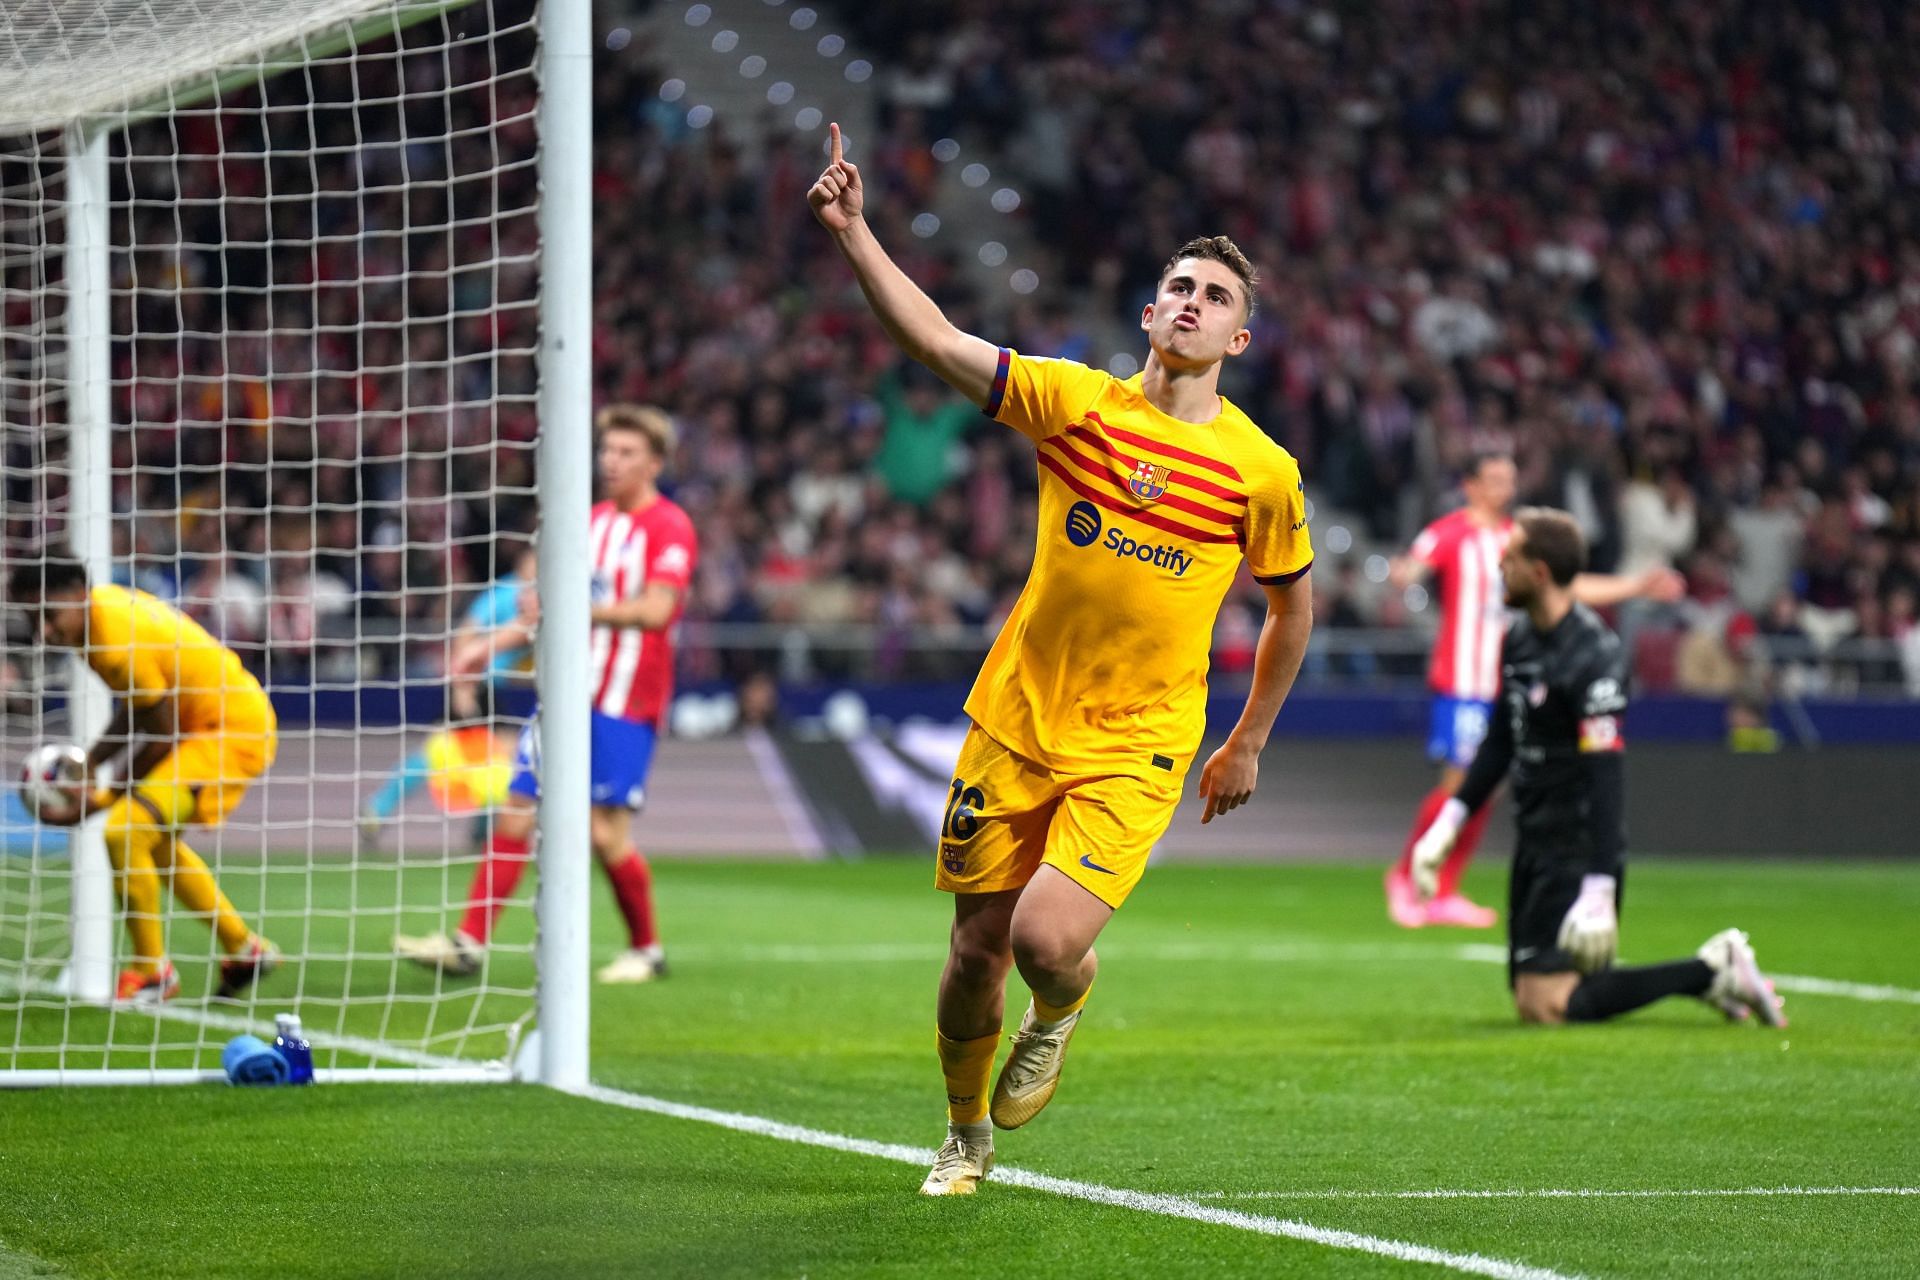 Fermin Lopez has been a hit at the Camp Nou this season.